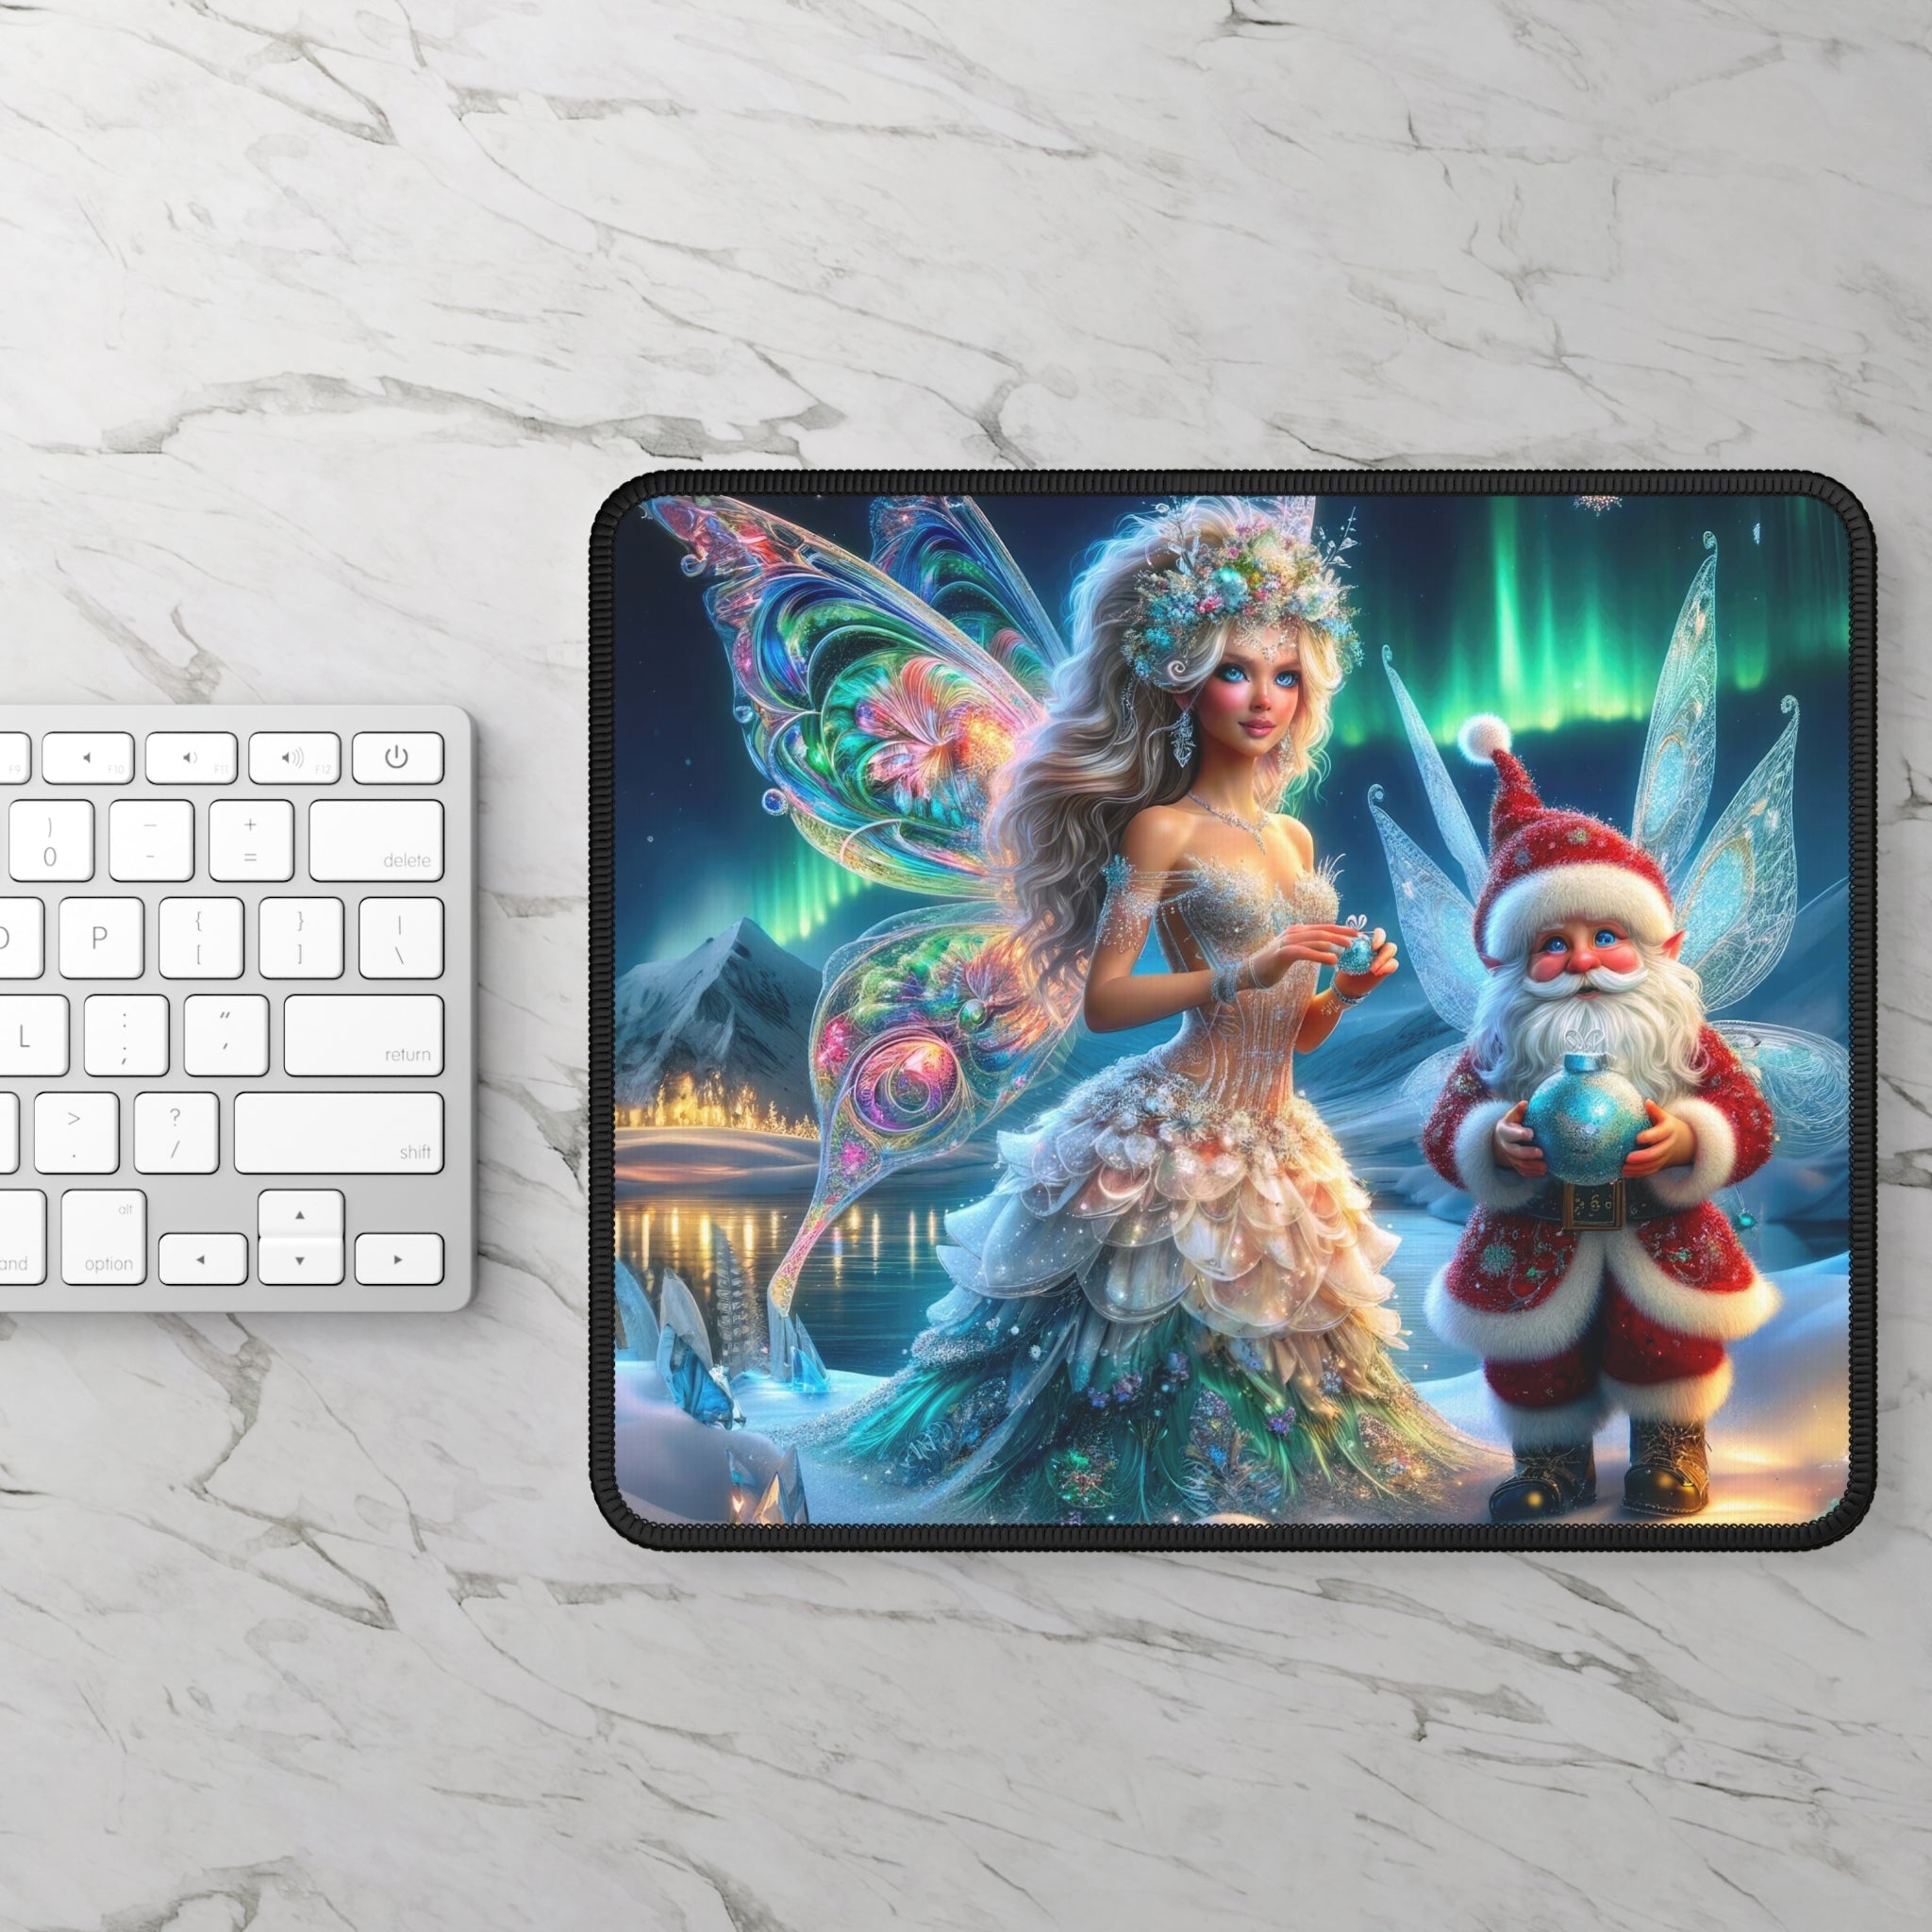 A Fairytale Christmas Gaming Mouse Pad